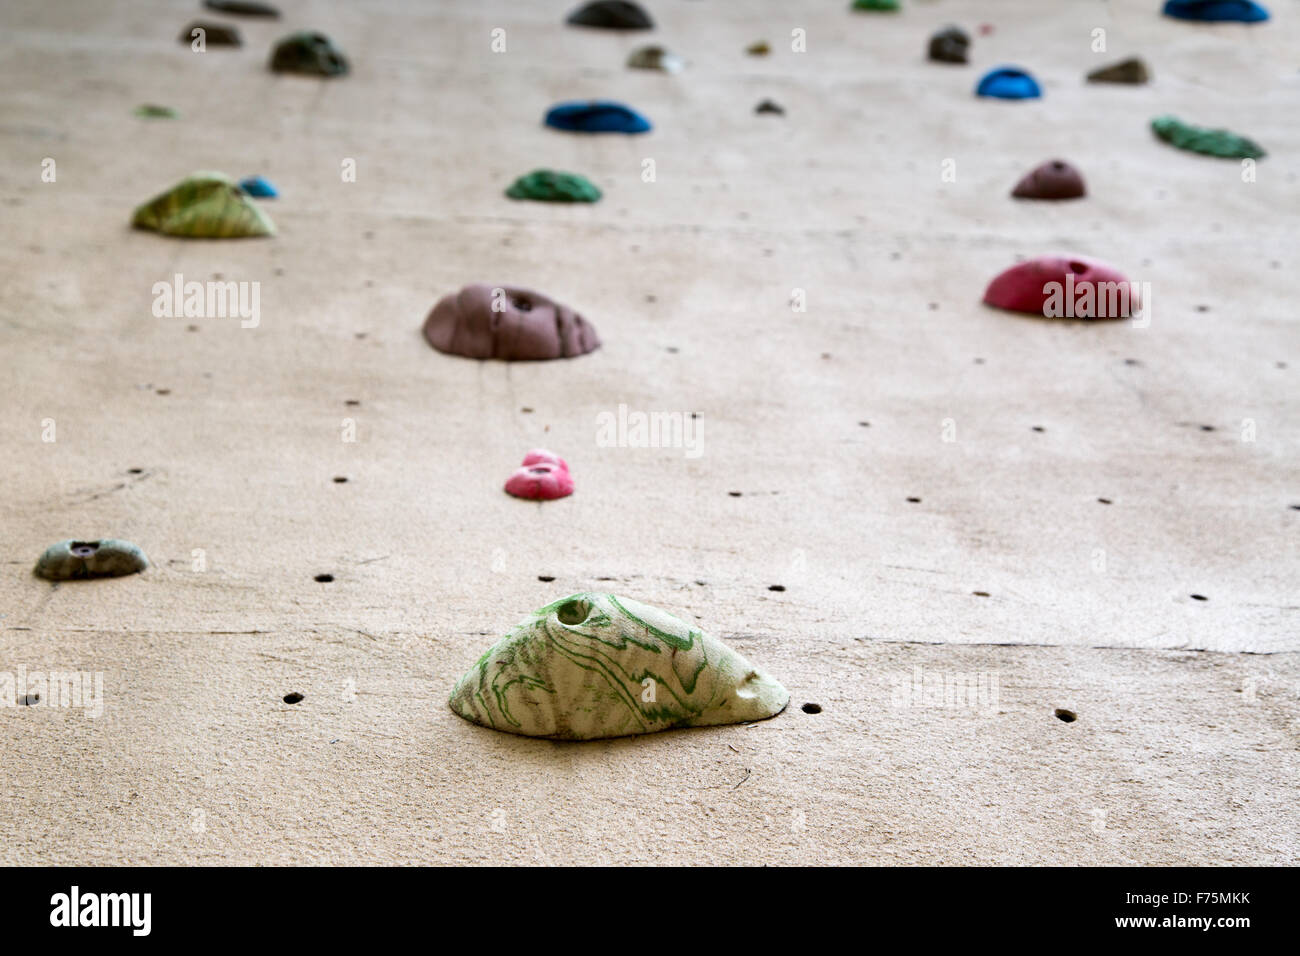 shallow depth of field looking up a climbing wall focused on the foot grip closest to the camera Stock Photo